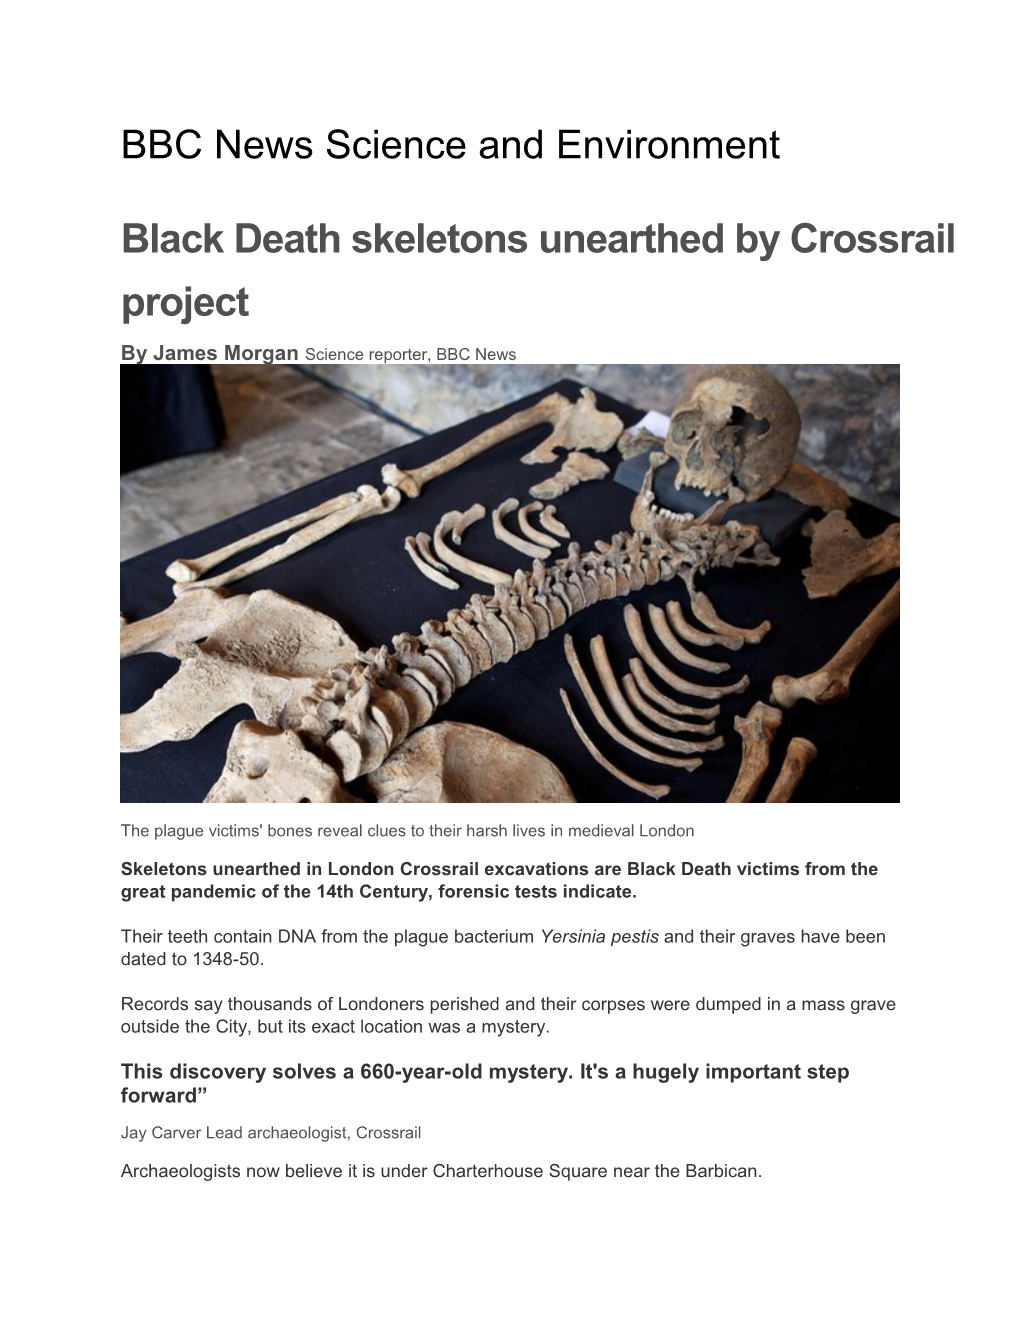 Black Death Skeletons Unearthed by Crossrail